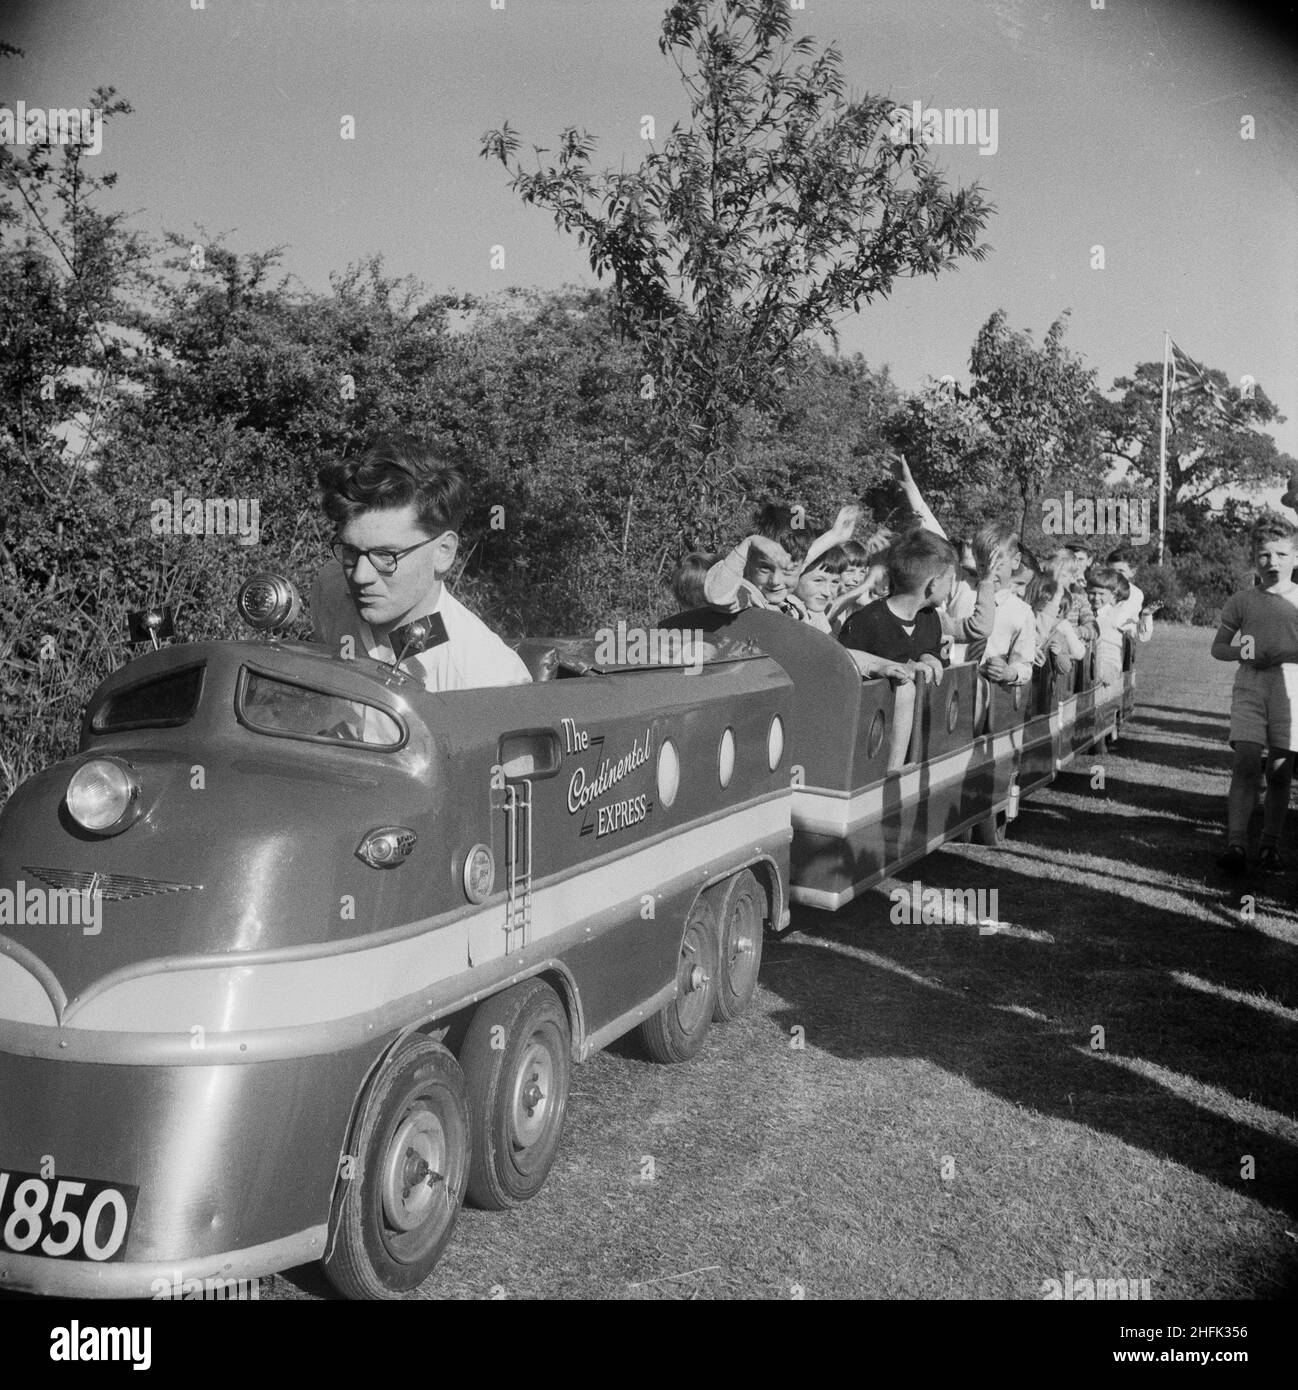 Laing Sports Ground, Rowley Lane, Elstree, Barnet, London, 18/06/1955. Children taking a ride on a miniature train named 'The Continental Express' during a Laing sports day at Elstree. This sports day was attended by people from Laing contracts in Thurleigh, Bradford, Harlow, Shell Haven, London, Welwyn Garden City, Leicester and even as far as Plymouth. The day included field and track competitions as well as special attractions including Scottish dancing, a flower show, gymnastic displays and music by the Silver Band of the 5th Hendon Company Boys' Brigade. Stock Photo